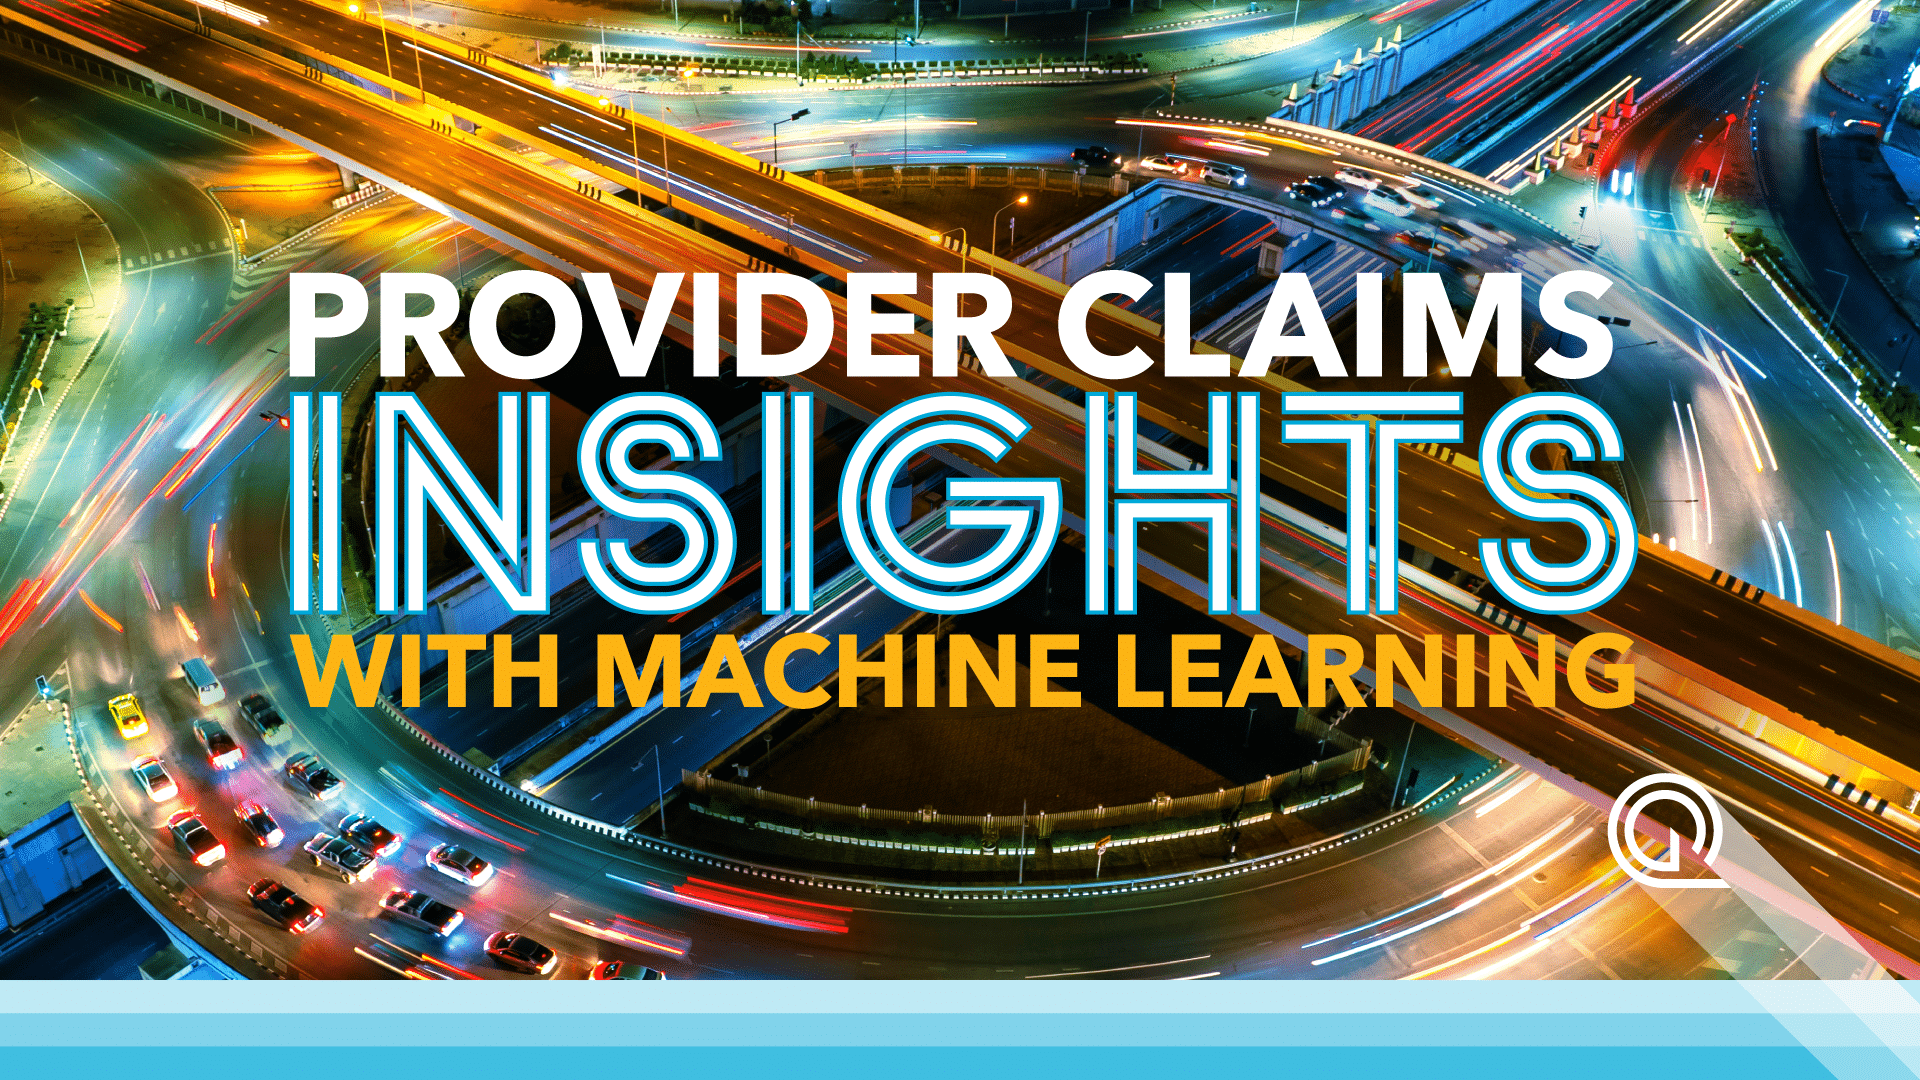 Quest Enterprise Services Provider Claims Insights with Machine Learning